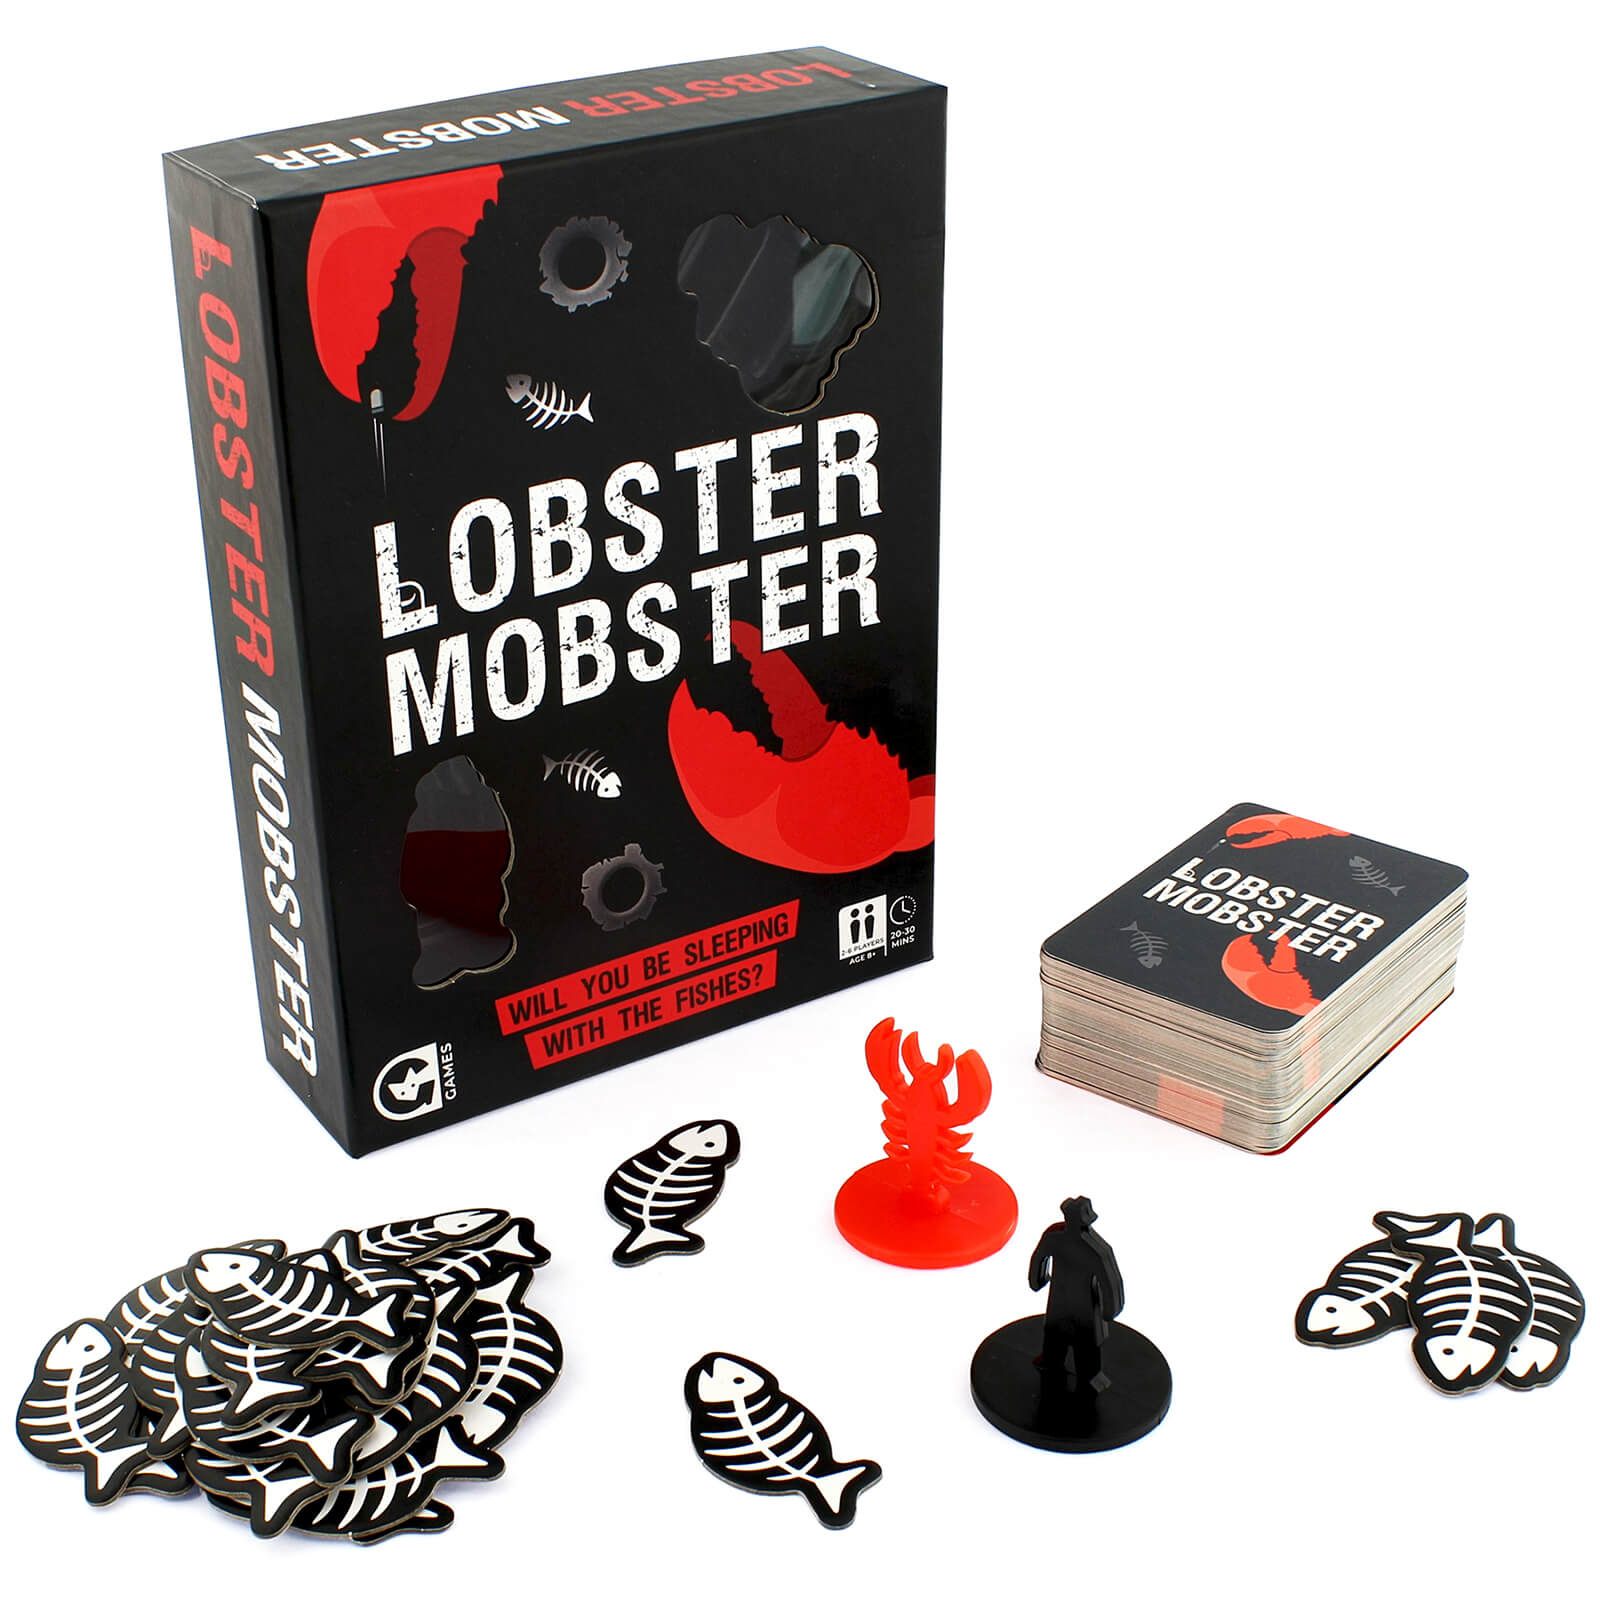 Photos - Other Toys LOBSTER Mobster Game 0112.1625.71 